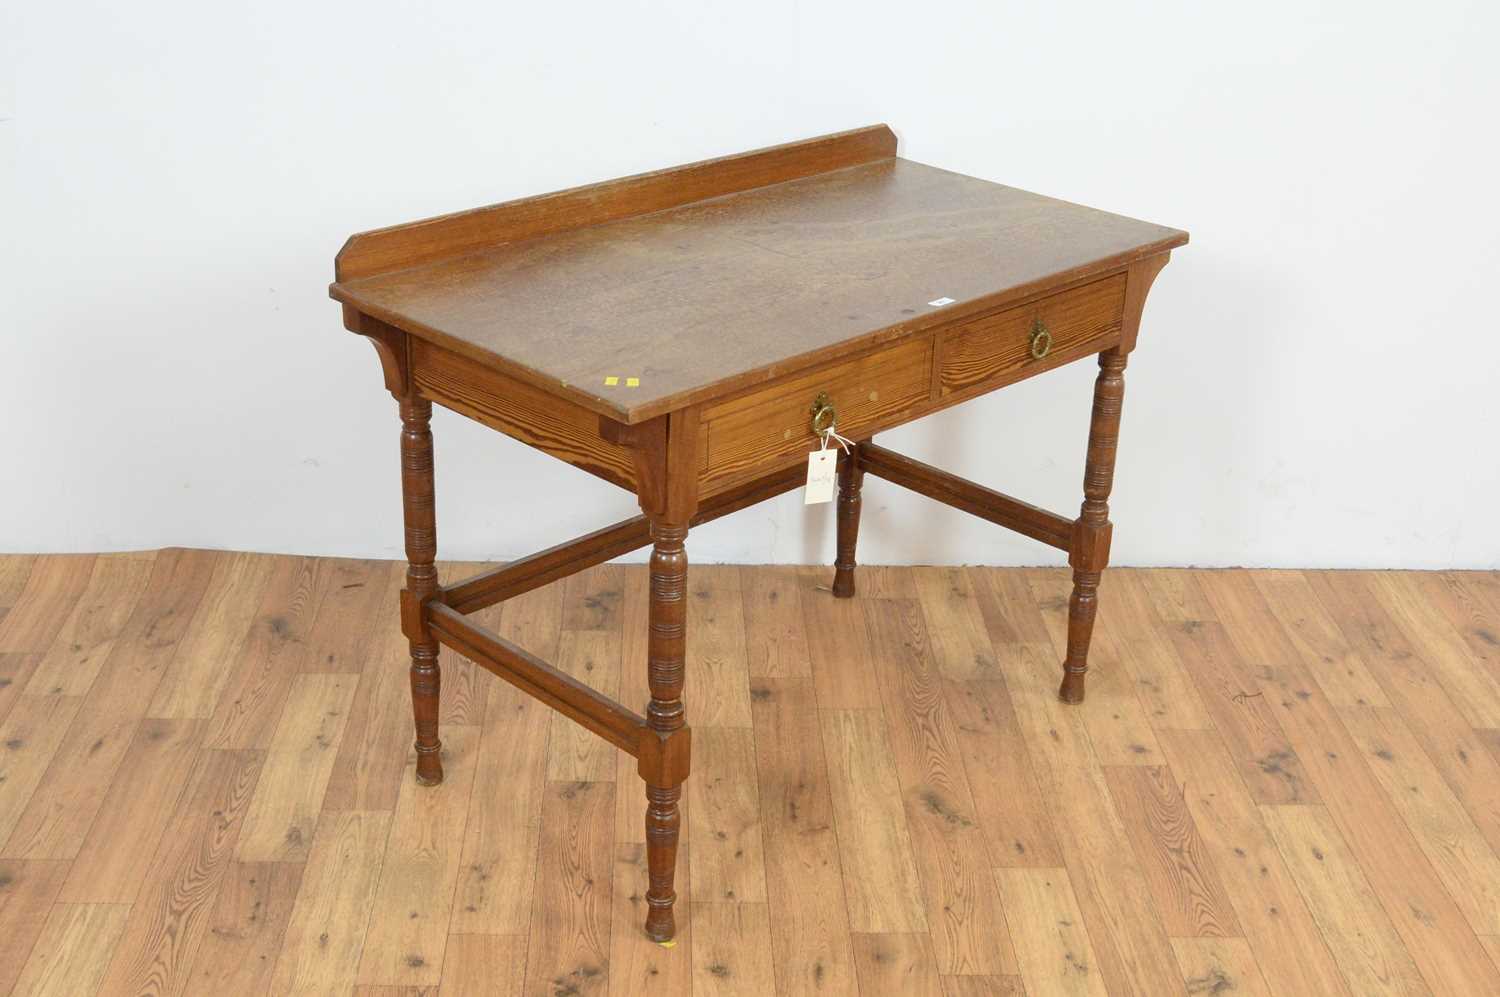 Gregory & Co, Regent St, London; An Arts and Crafts walnut and simulated pine washstand - Image 3 of 4